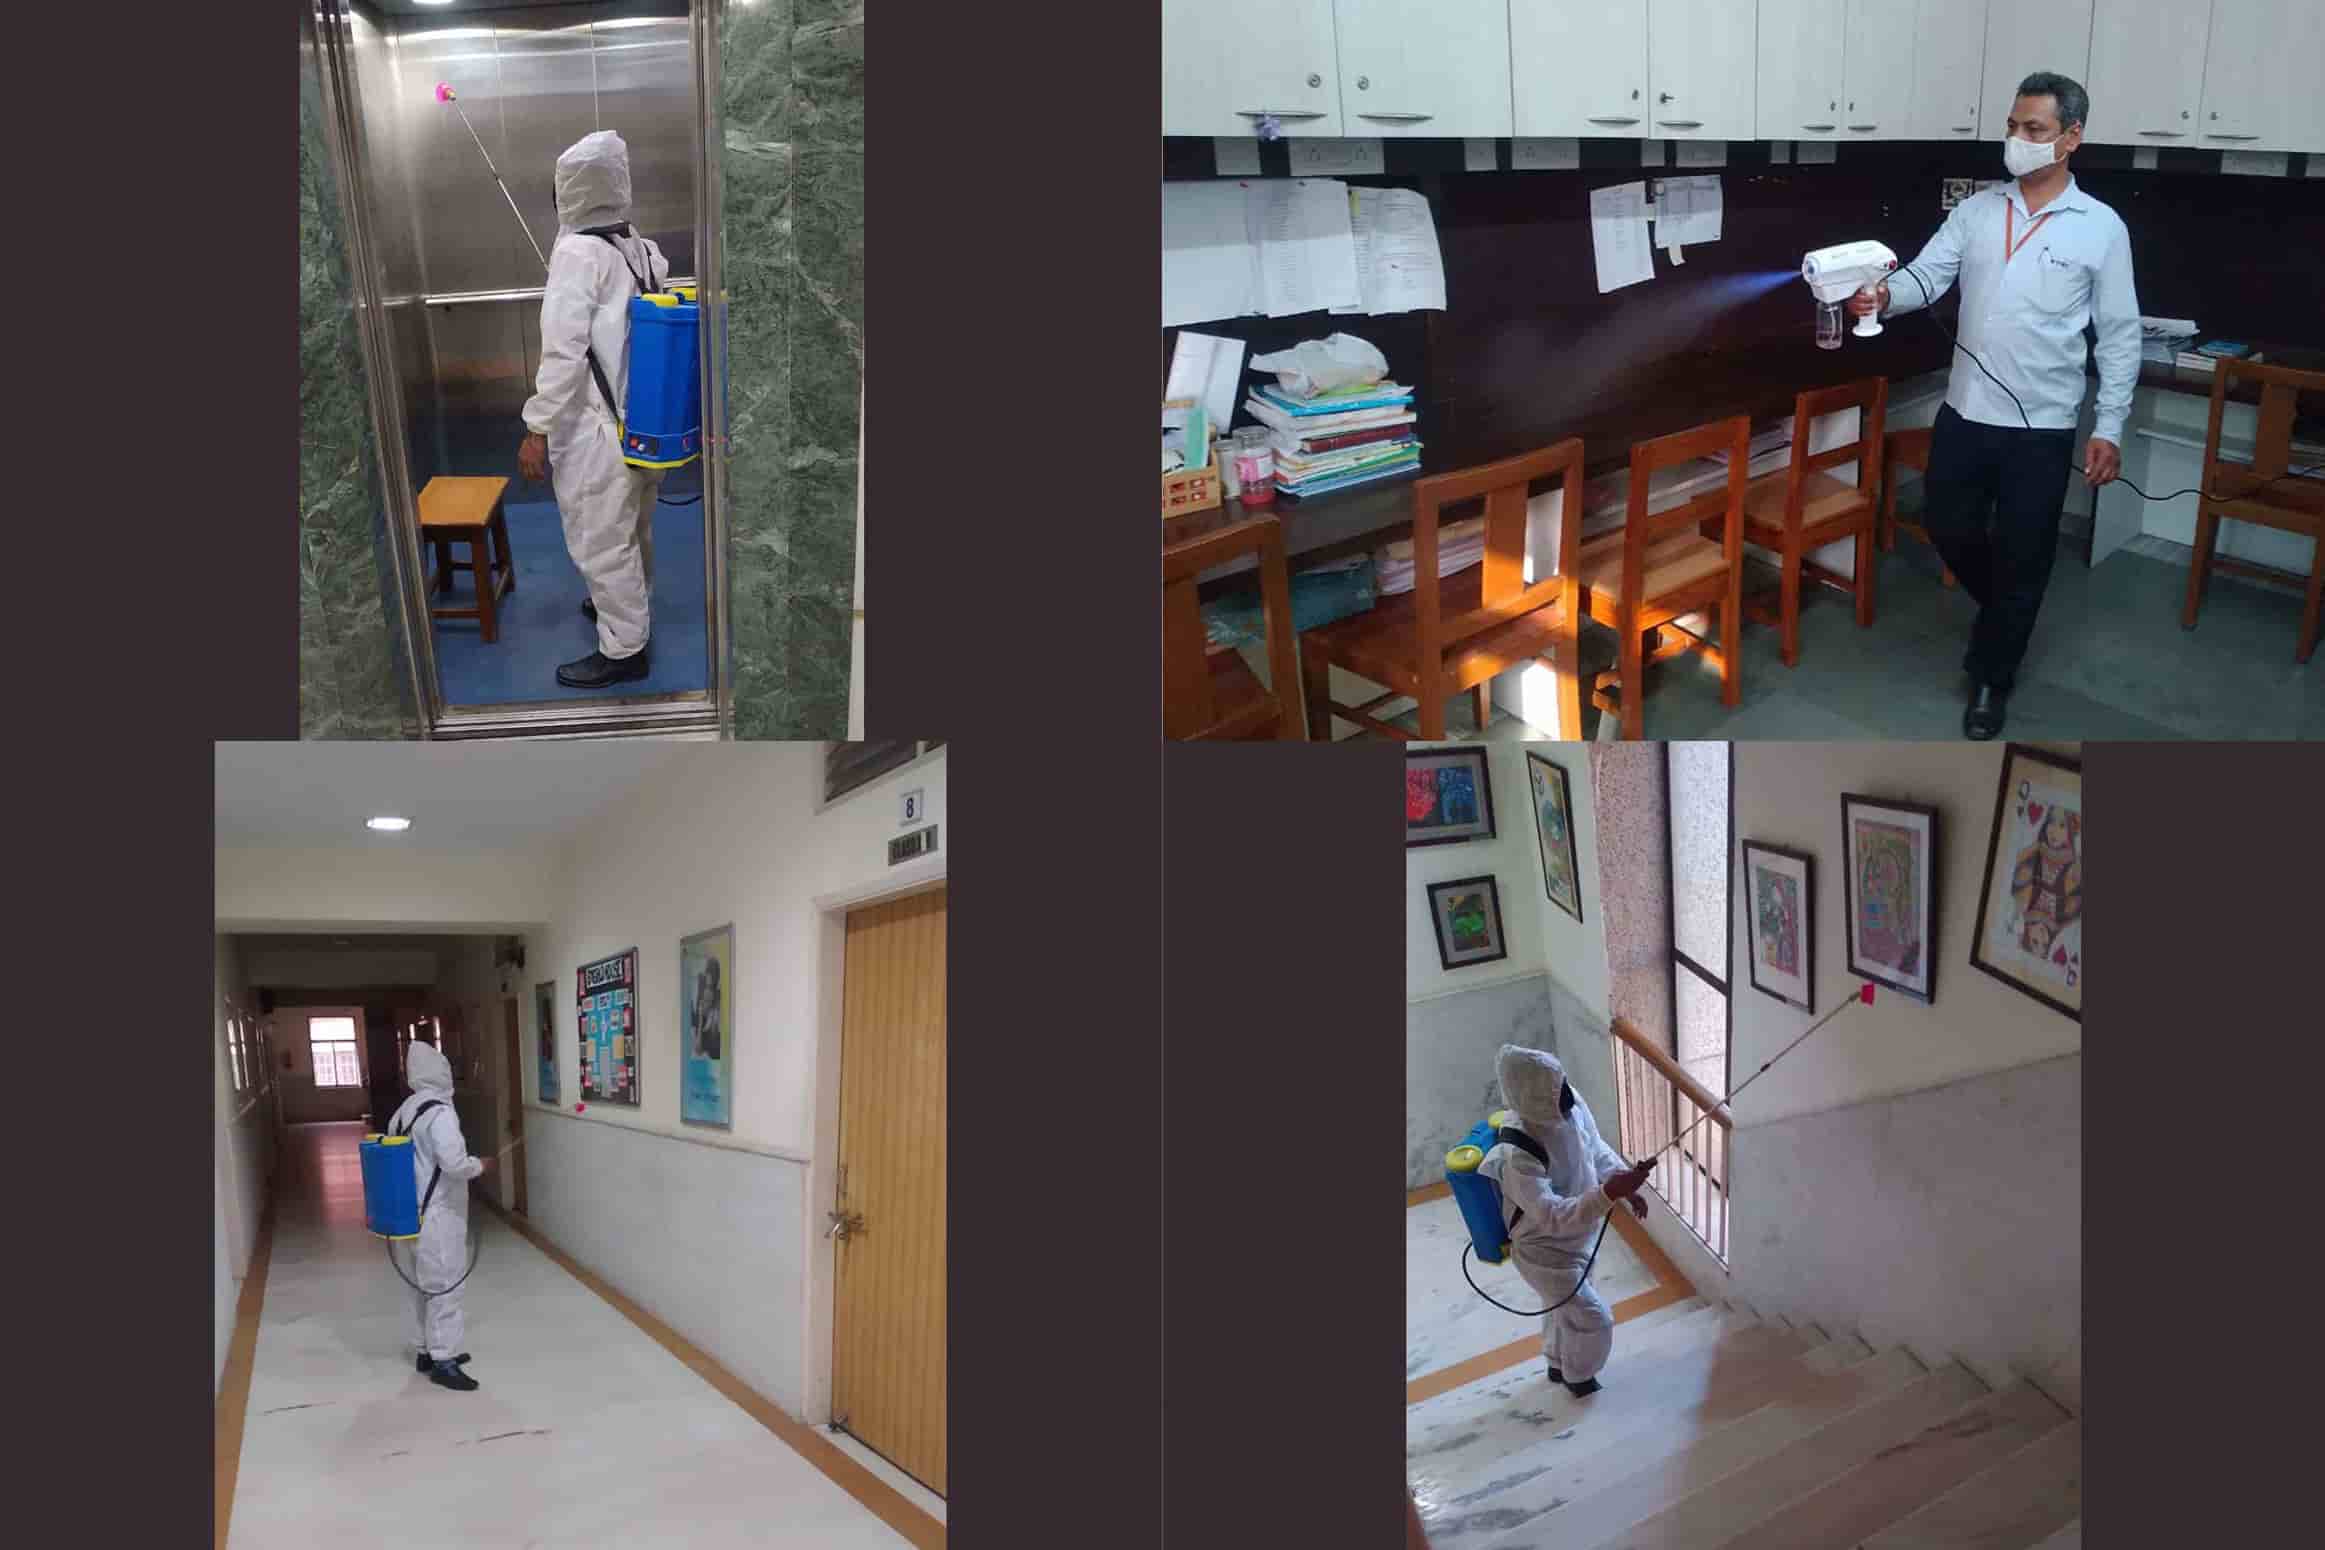 Sanitisation in the (clockwise from top left) lift, one of the staff rooms, staircase and lobby of Mahadevi Birla World Academy.